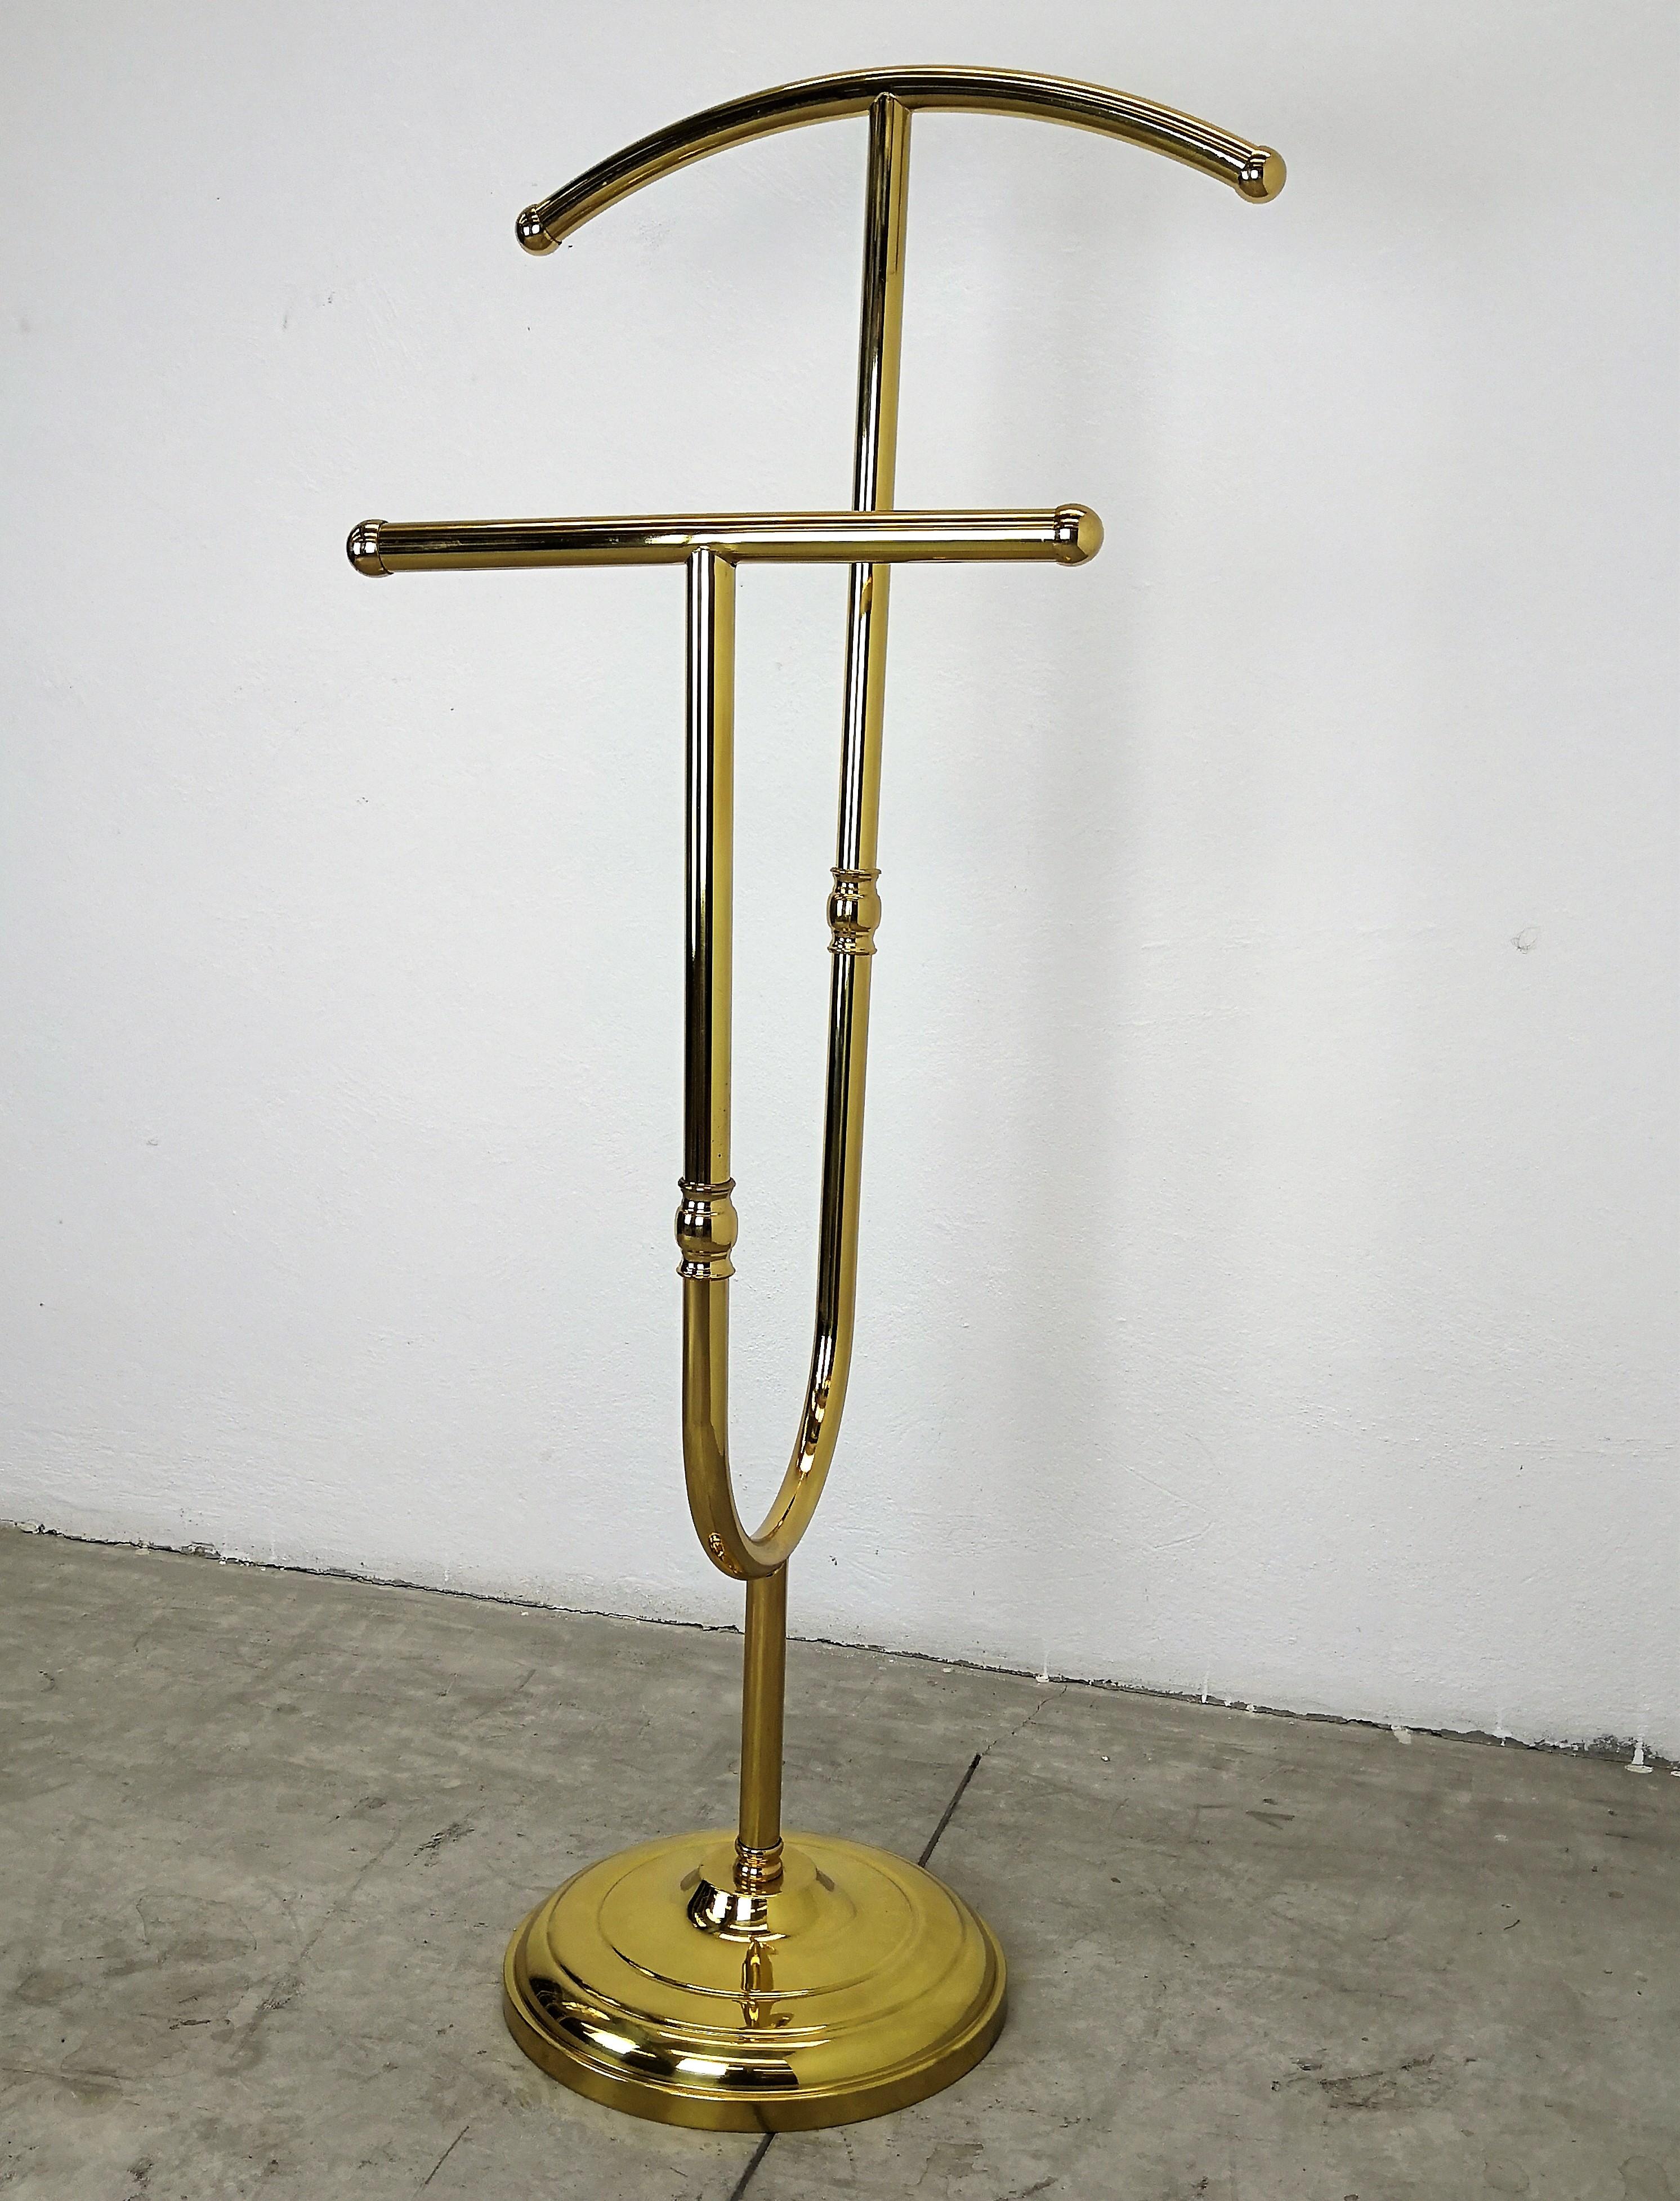 Vintage 1980s Italian brass dressboy valet stand. This beautiful and elegant brass valet was designed and manufactured in Italy. A great piece that perfectly adds to every home decor the typical glitz, glamour, and gold of Hollywood Regency style